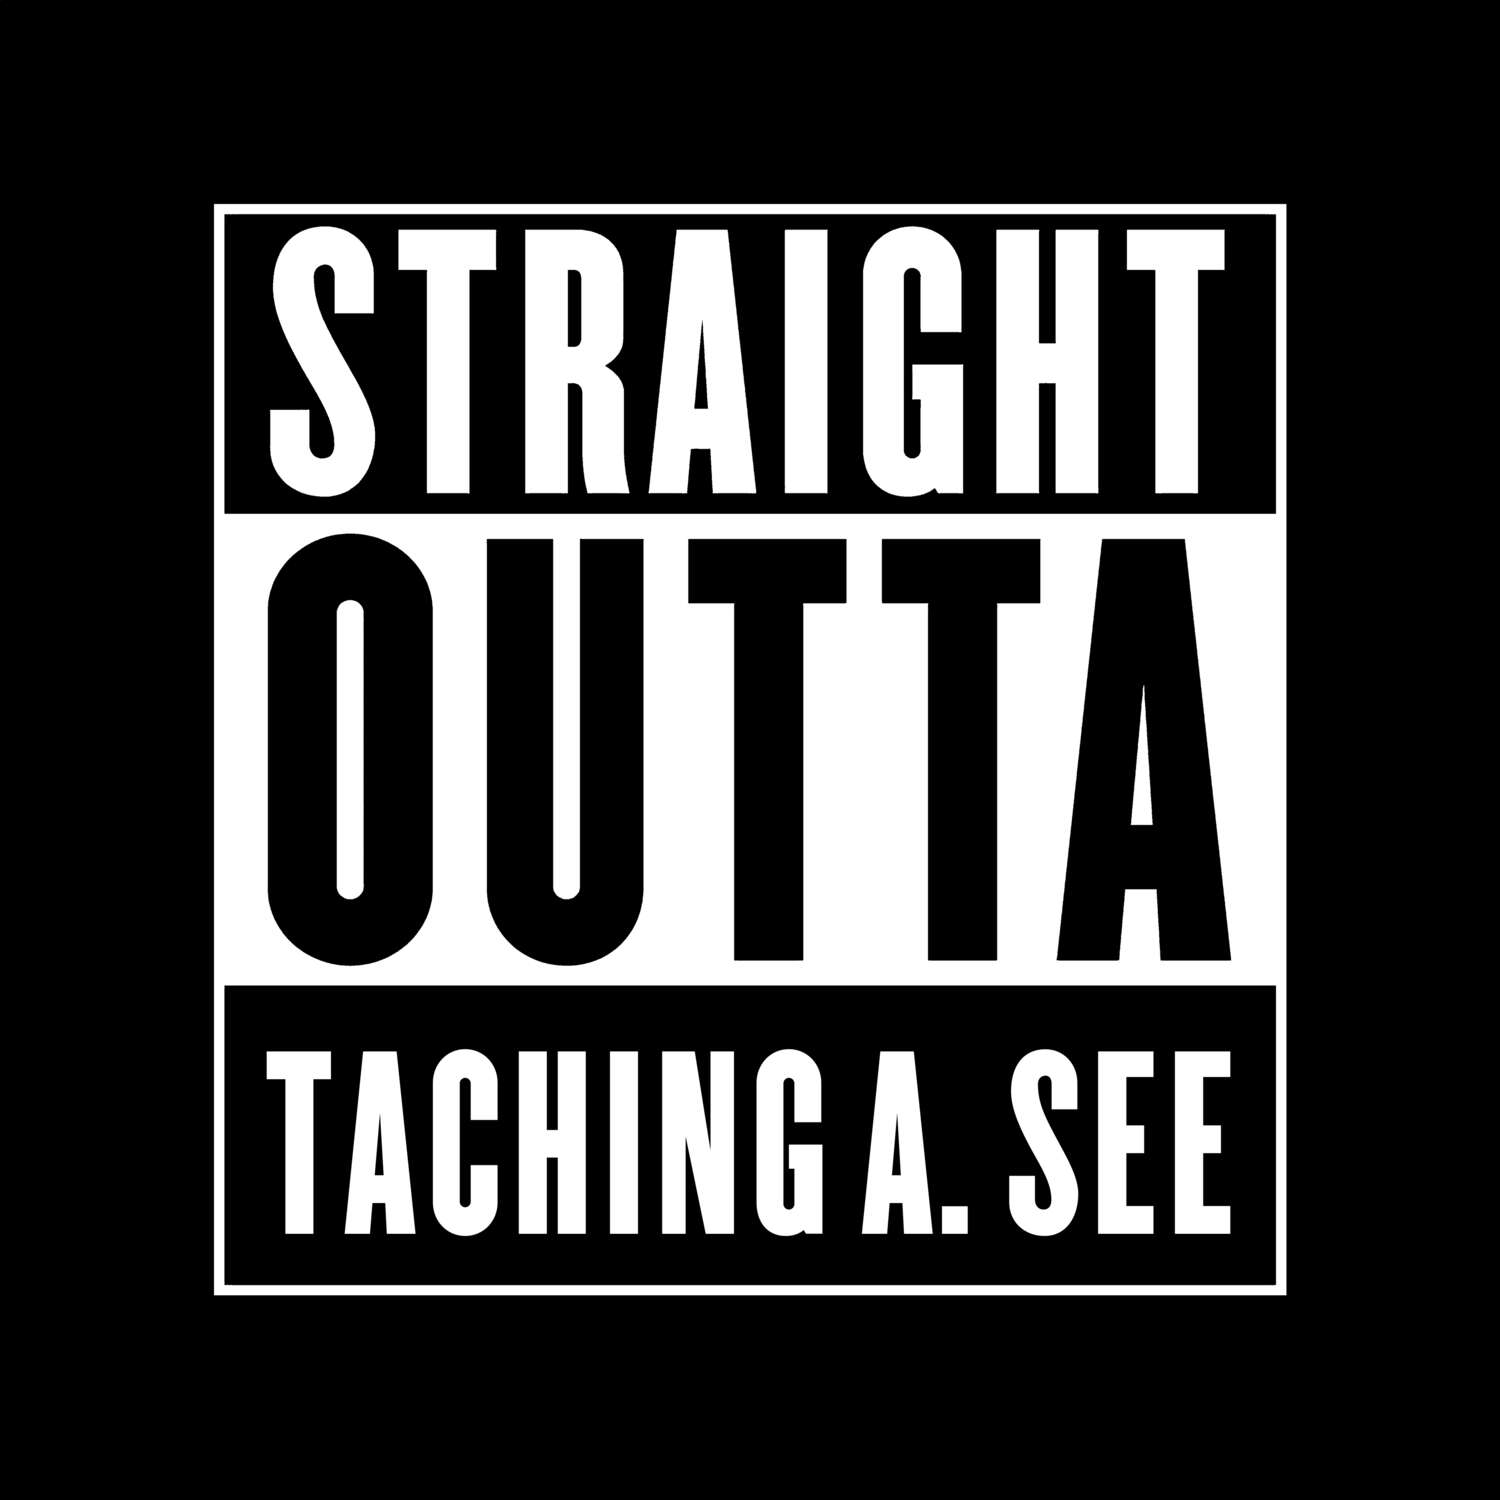 Taching a. See T-Shirt »Straight Outta«